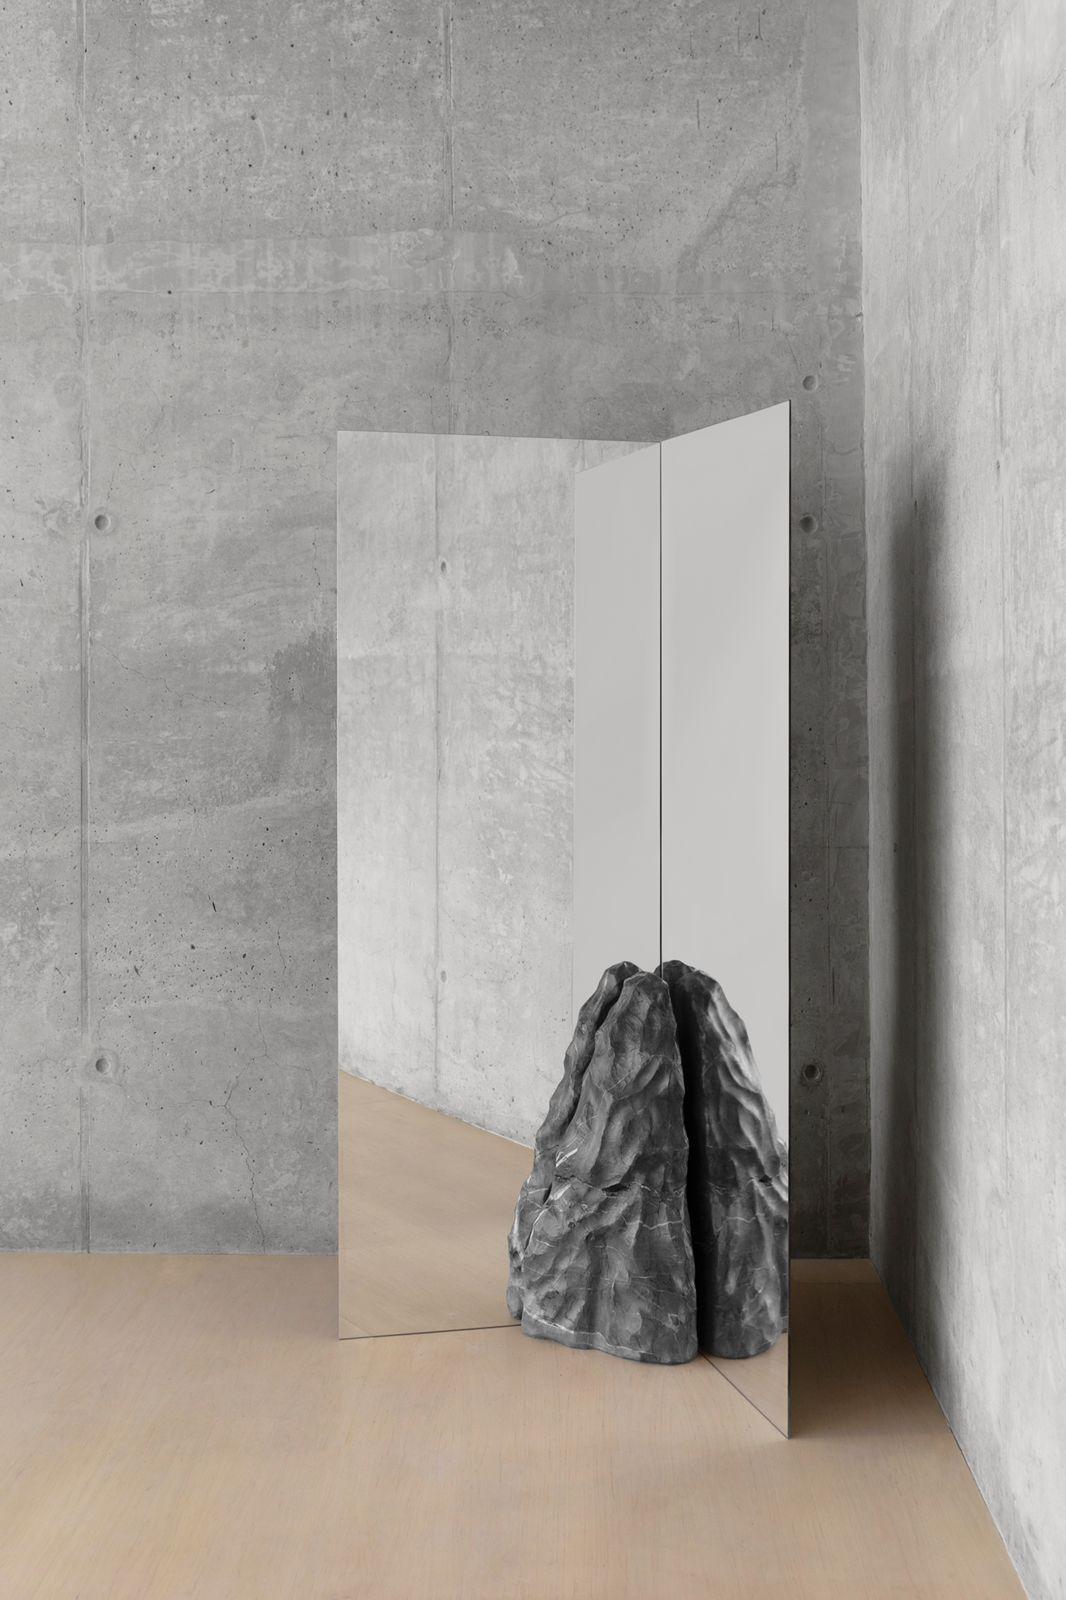 Divergente double mirror by Andres Monnier.
One of a Kind.
Dimensions: W 100 x L 80 x H 180 cm.
Materials: grey quarry stone, glass (mirror).

The piece inspired by a convergent plate boundary, the location where two tectonic plates are moving